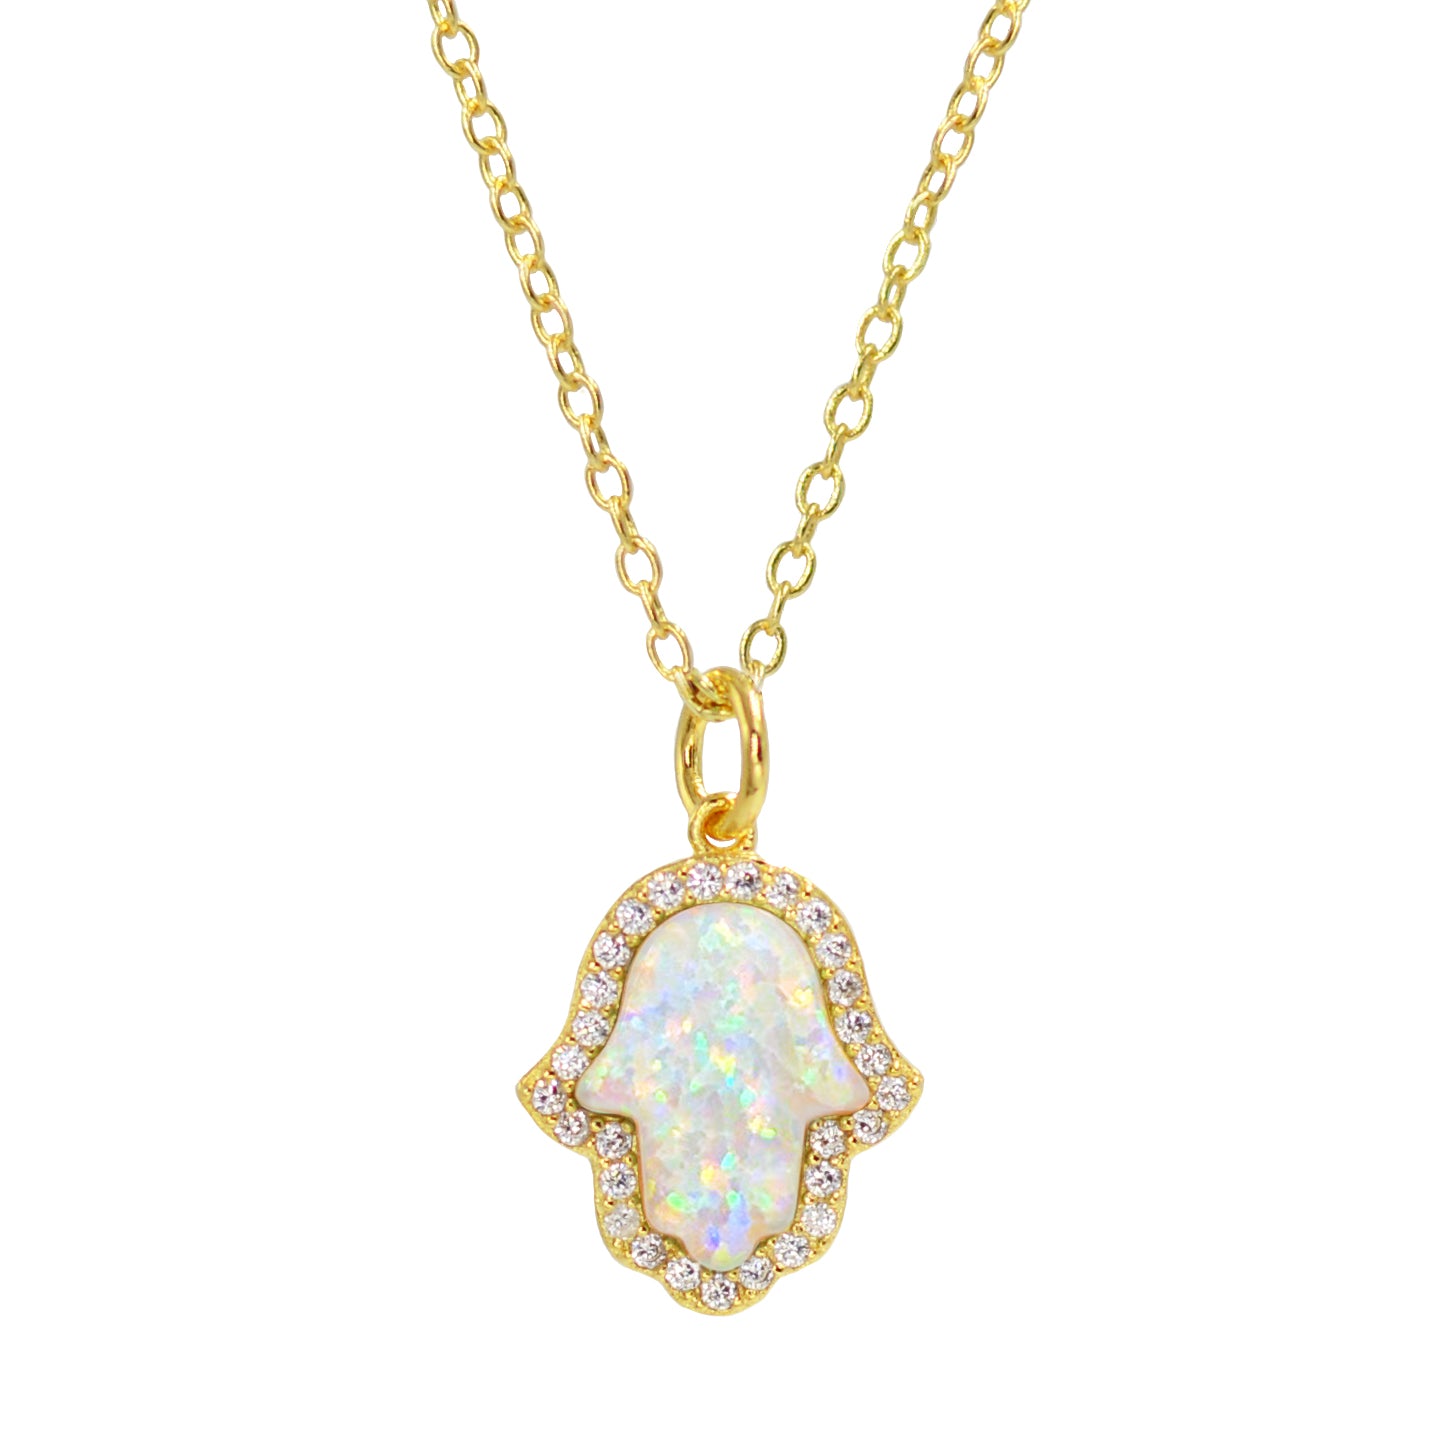 Hamsa Hand White Opal Necklace in Gold